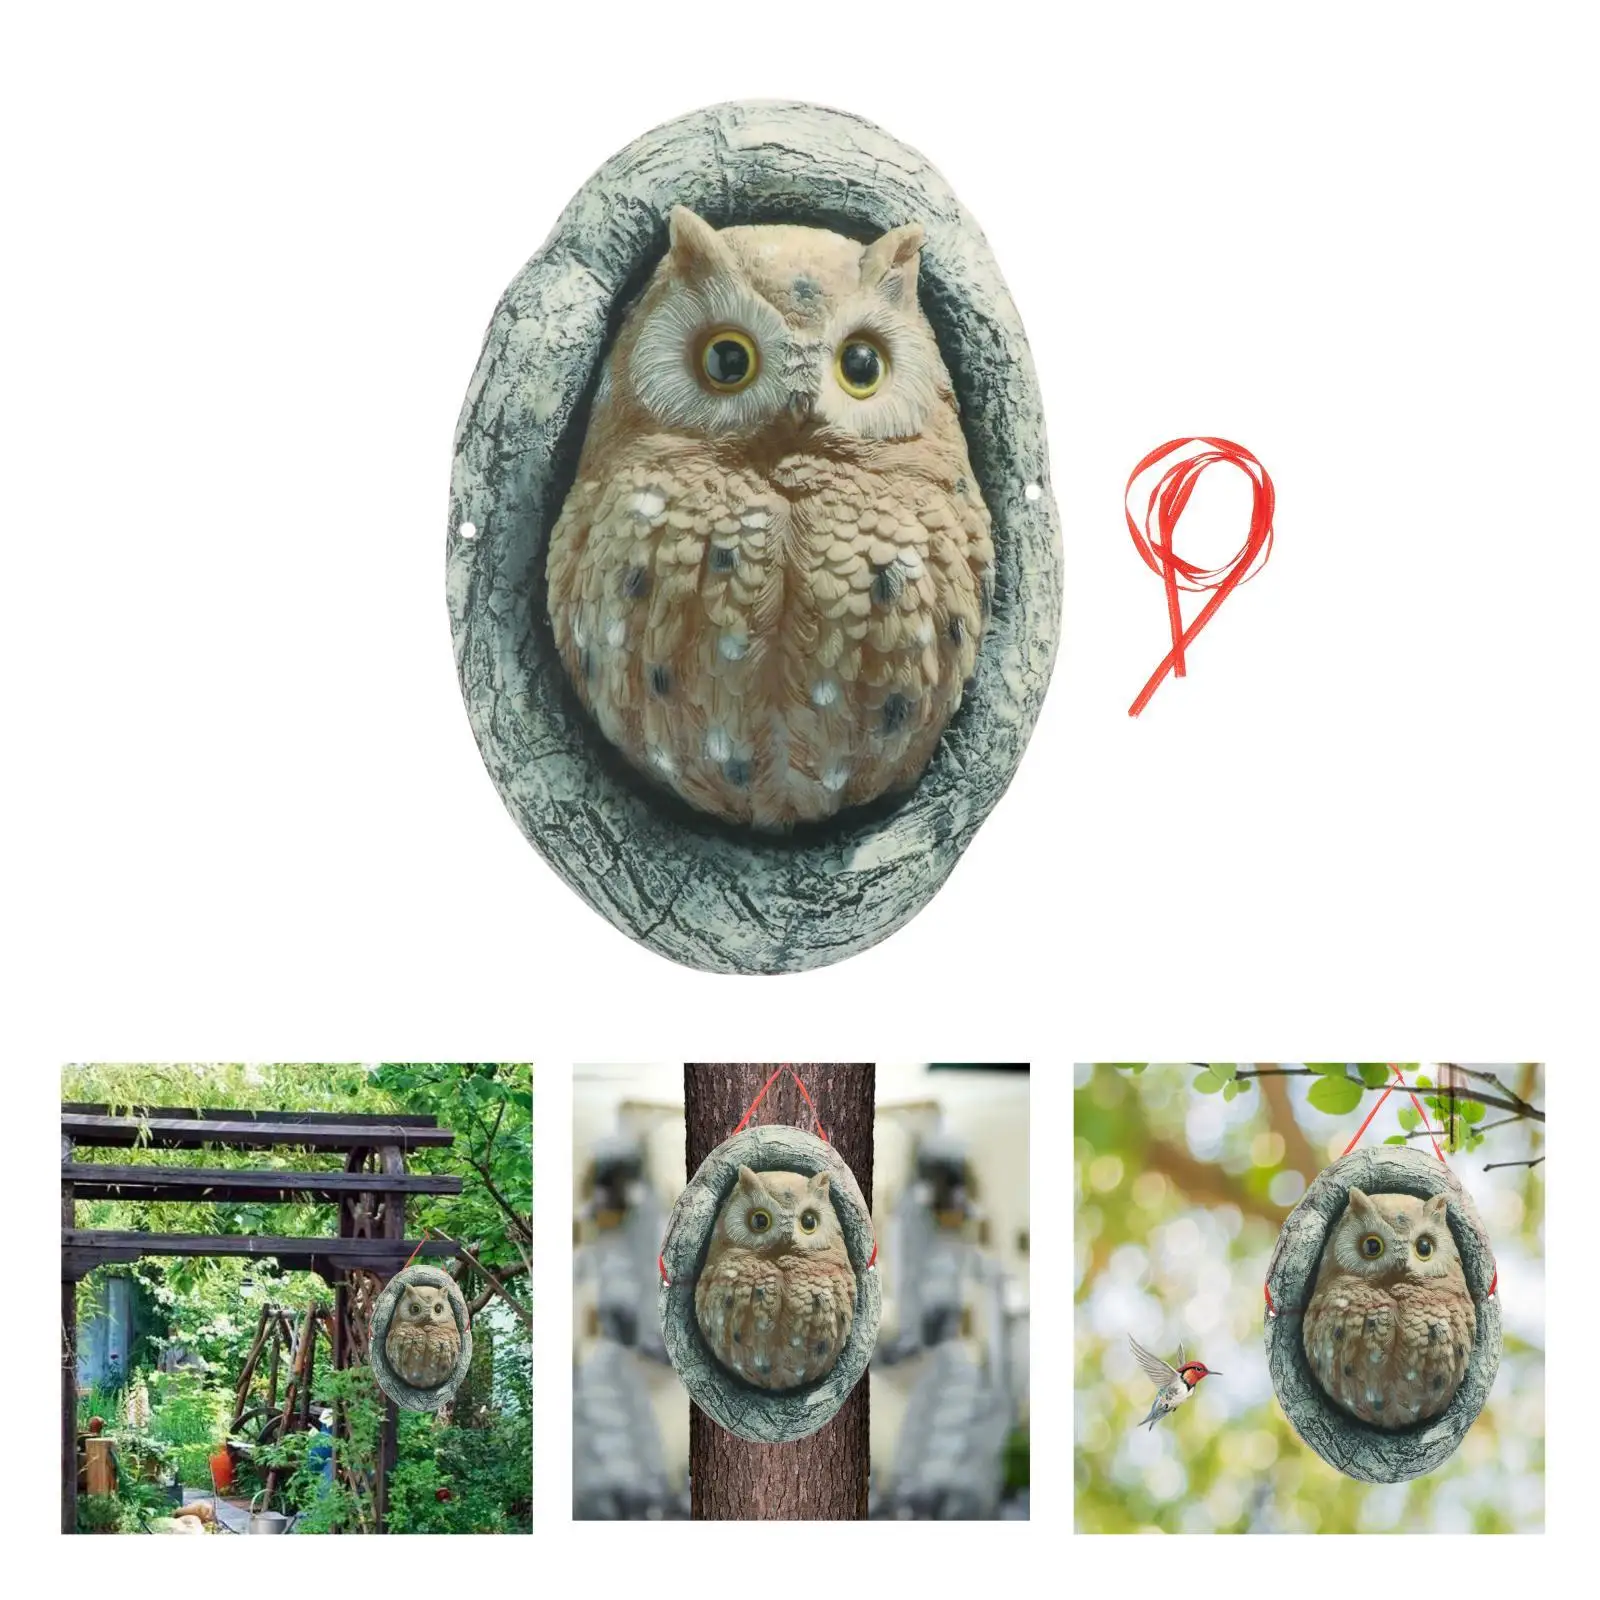 Funny Owl Ornaments Garden Statue Hanging Figurines   for Outdoor Home Artwork